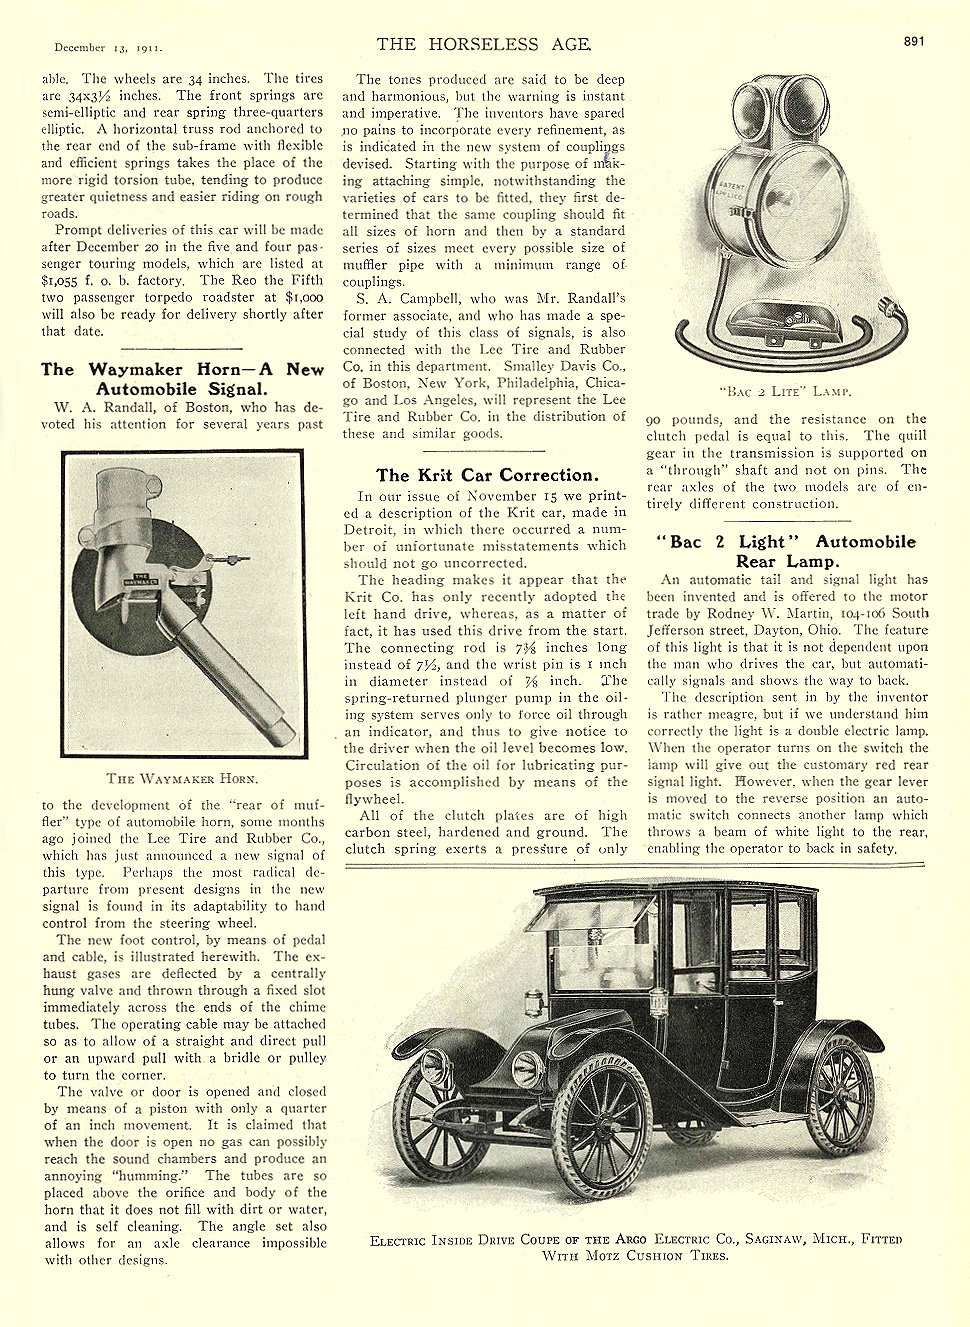 1911 12 13 ARGO Electric Electric Inside Drive Coupe THE HORSELESS AGE December 13, 1911 University of Minnesota Library 8.25″x11.5″ page 891